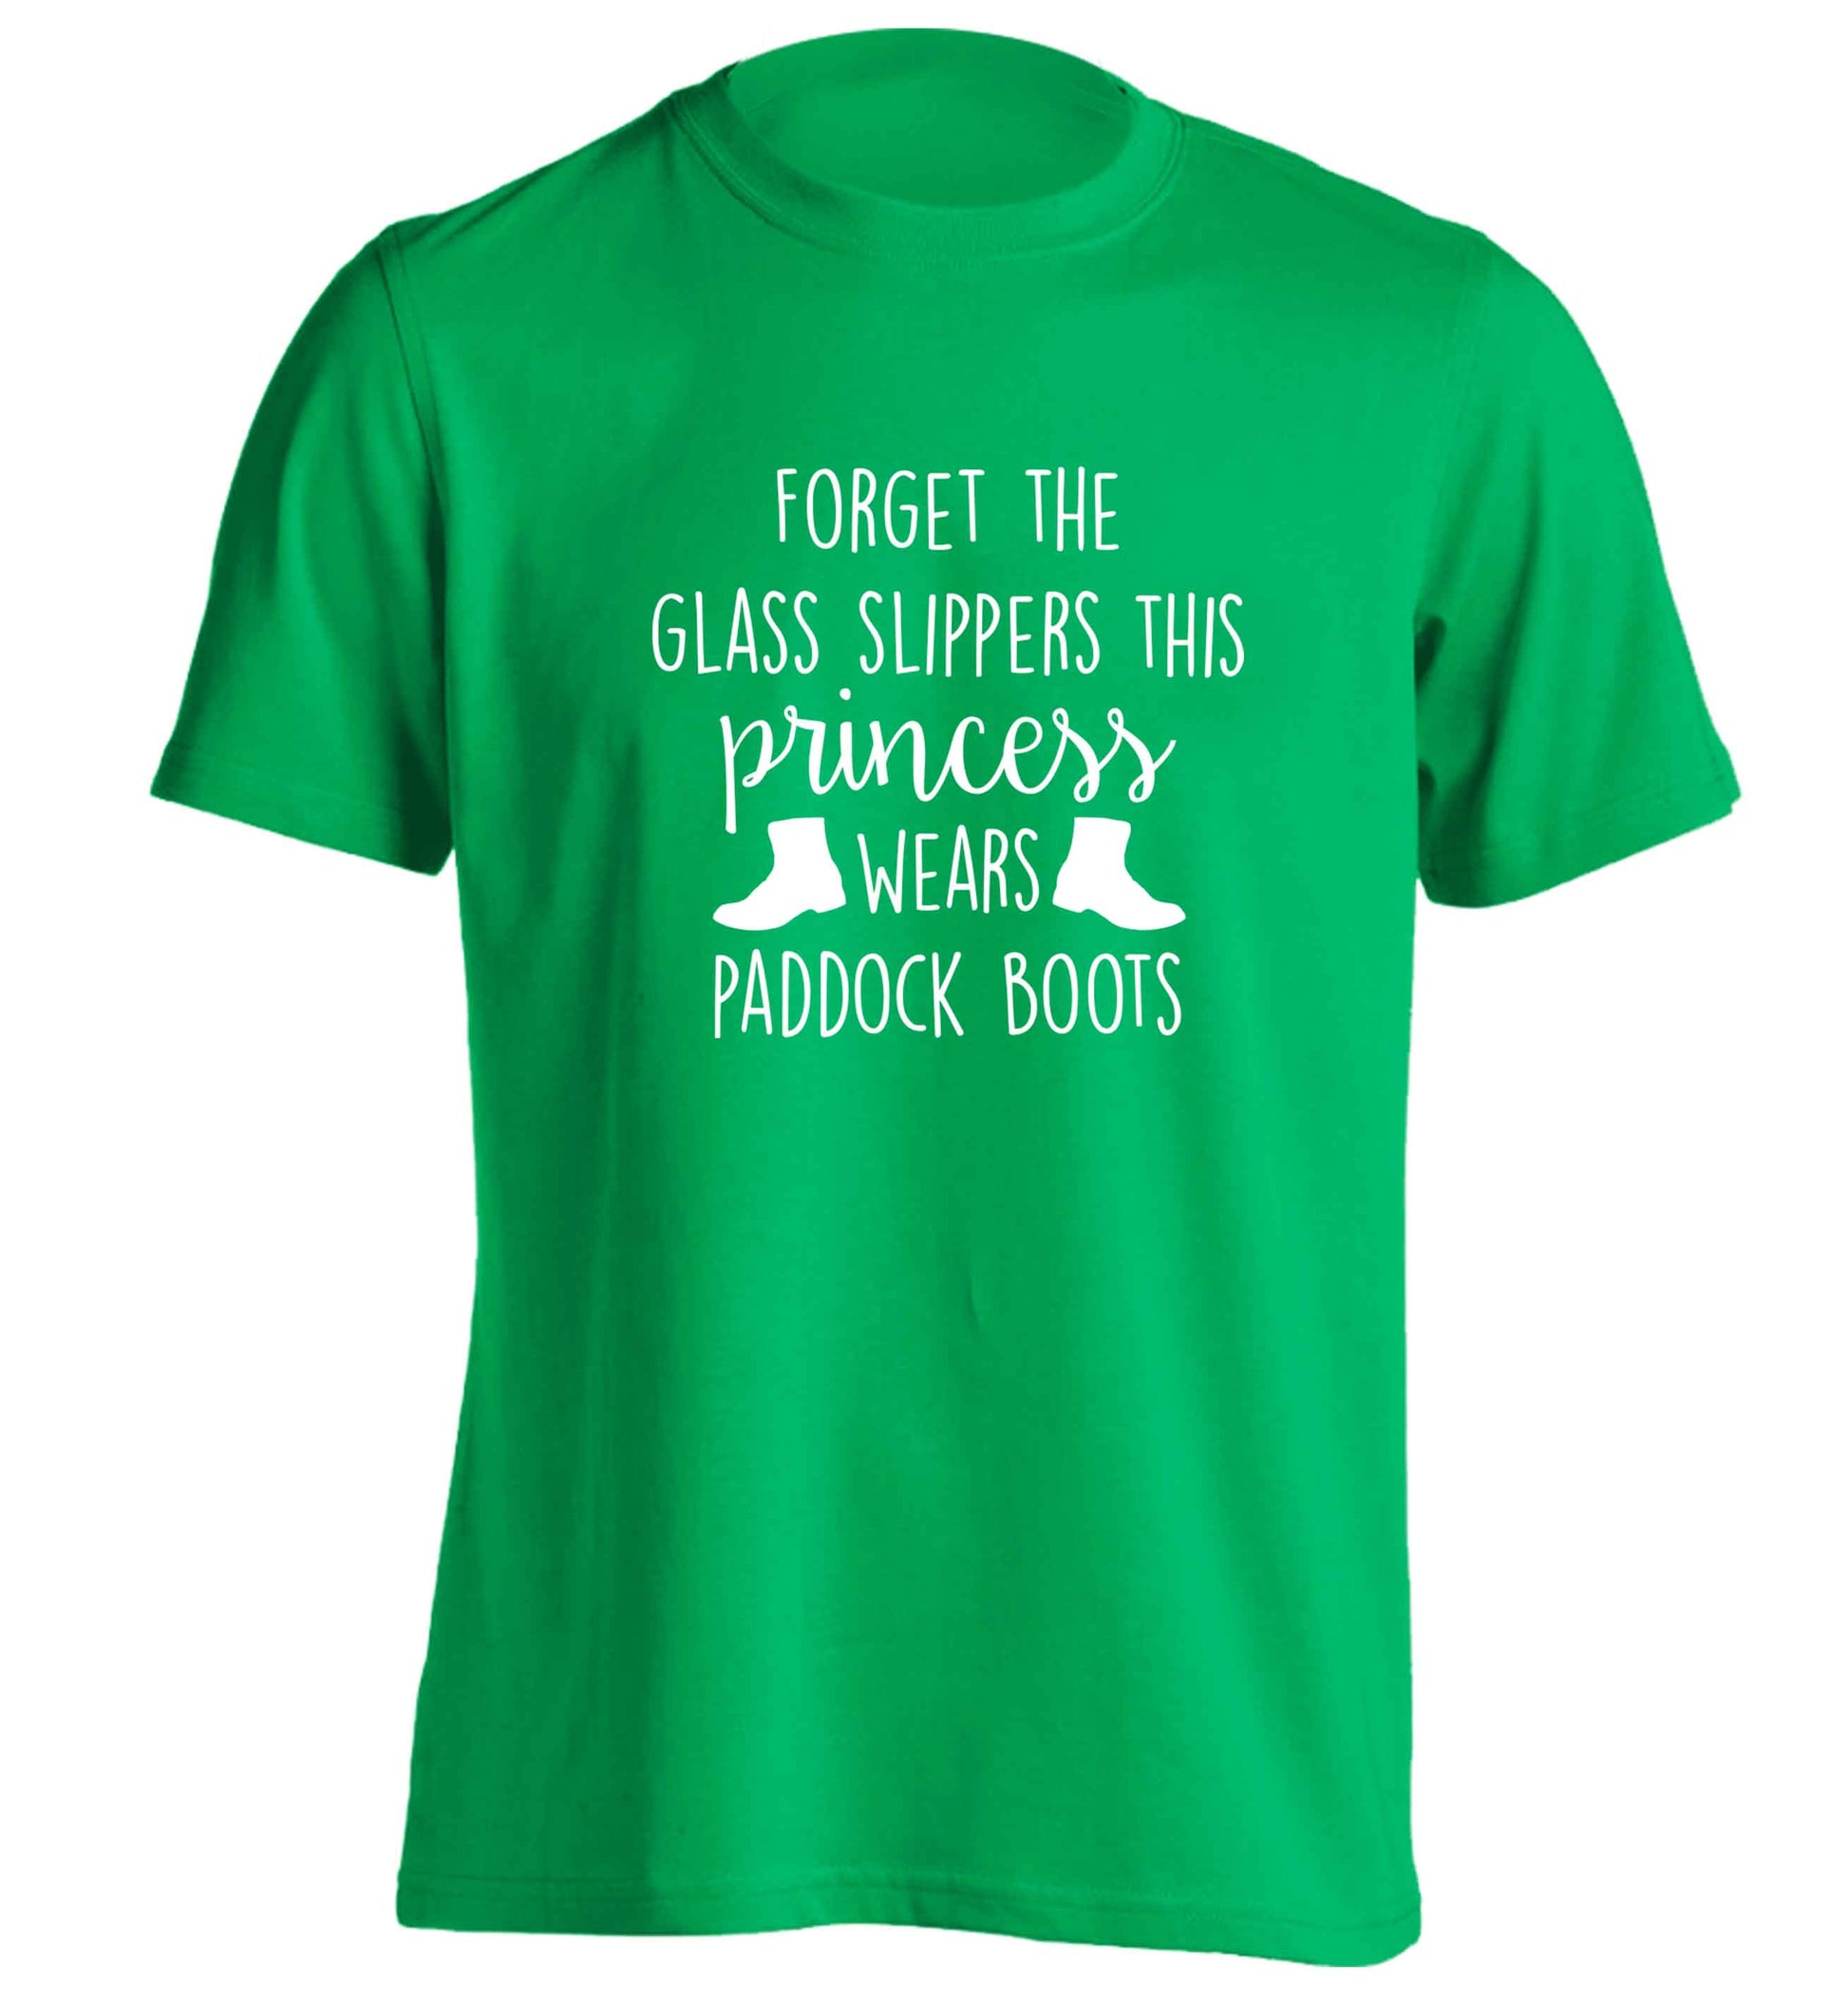 Forget the glass slippers this princess wears paddock boots adults unisex green Tshirt 2XL